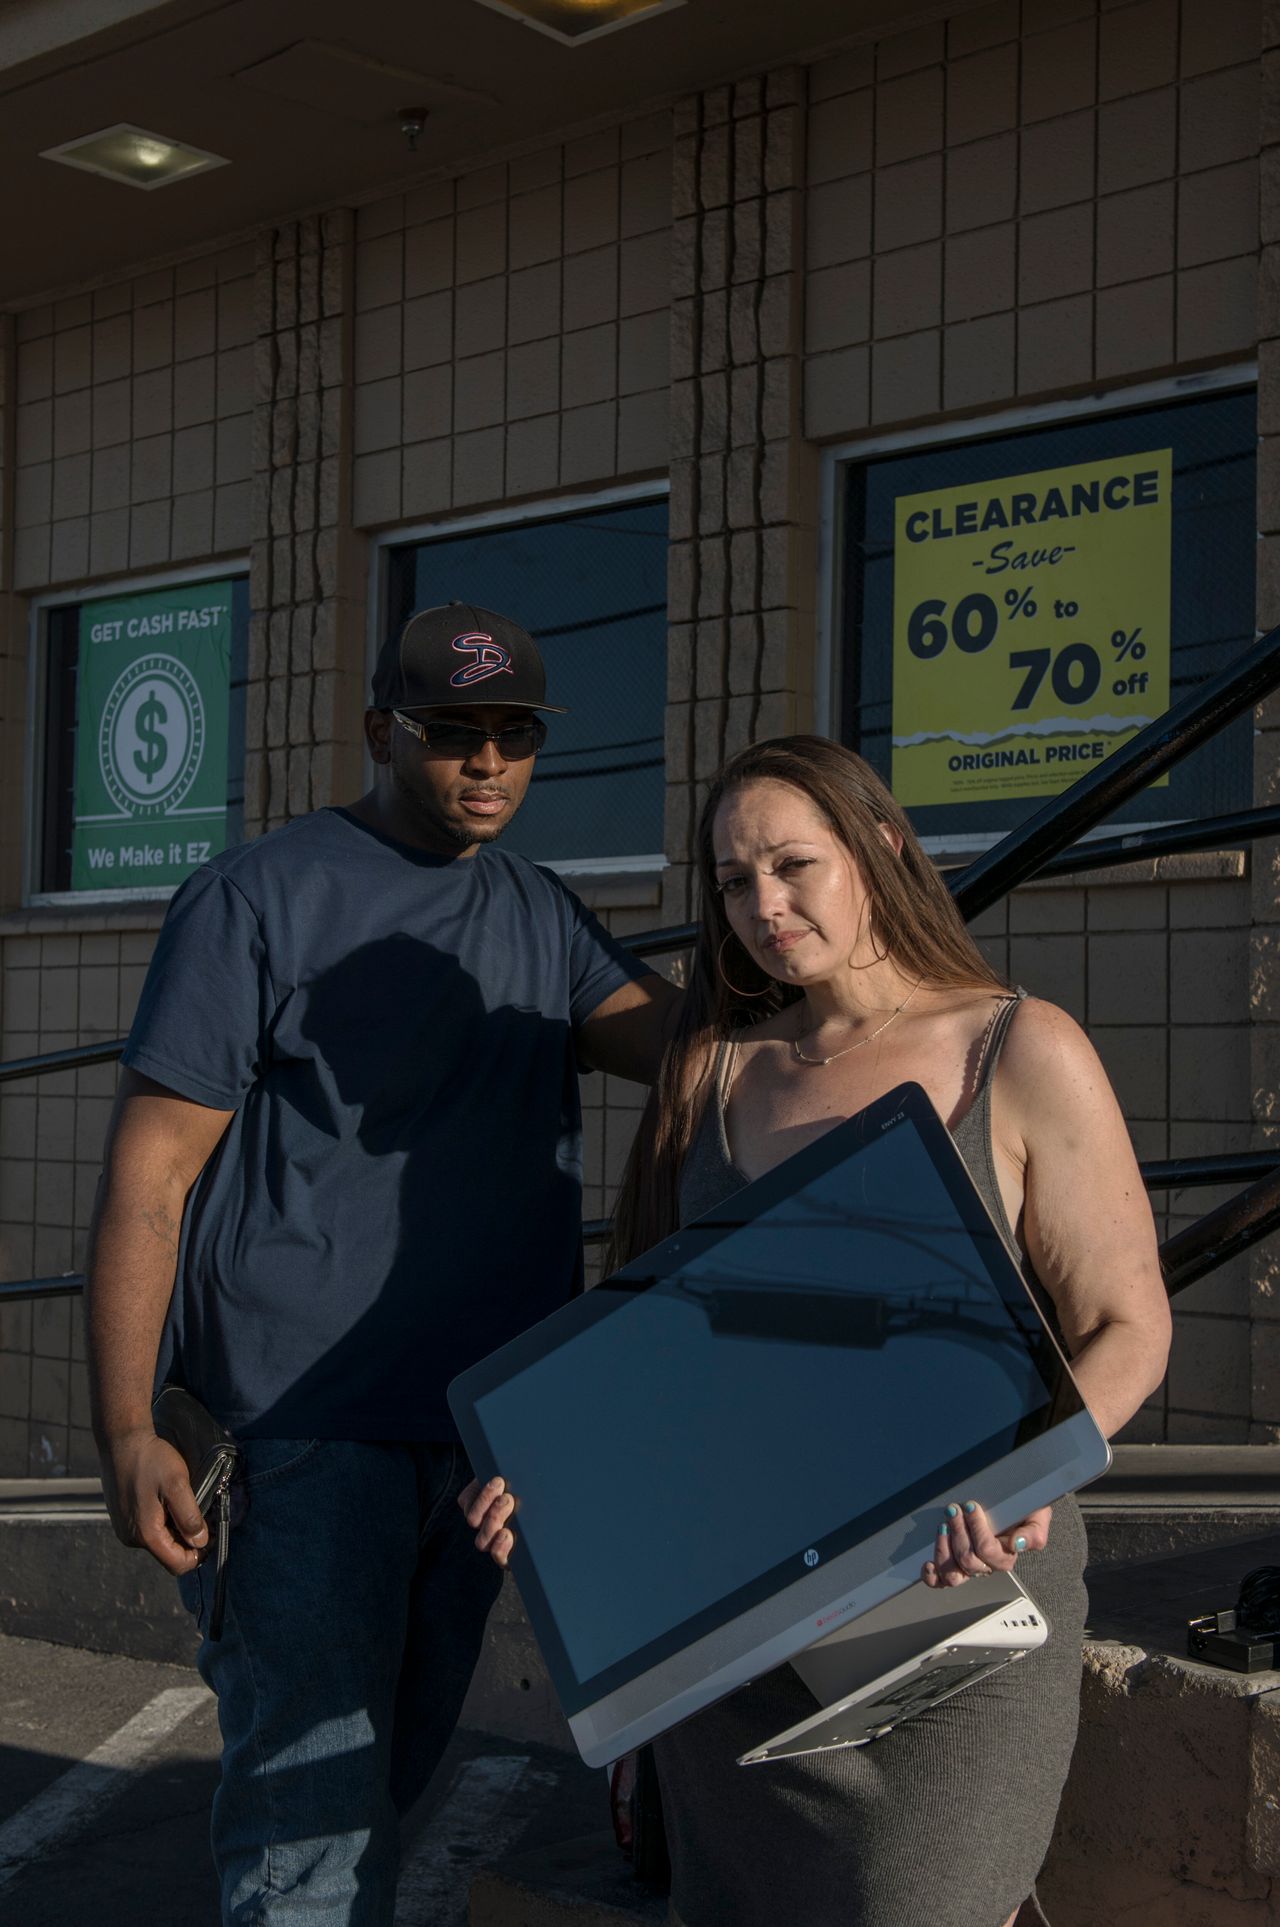 Cue and Sara Lovato wait in line with a computer they're hoping to sell at an EZPawn on April 13, 2020. “Gotta get some gas,” said Sara. Her work in behavioral health has been affected by the coronavirus.